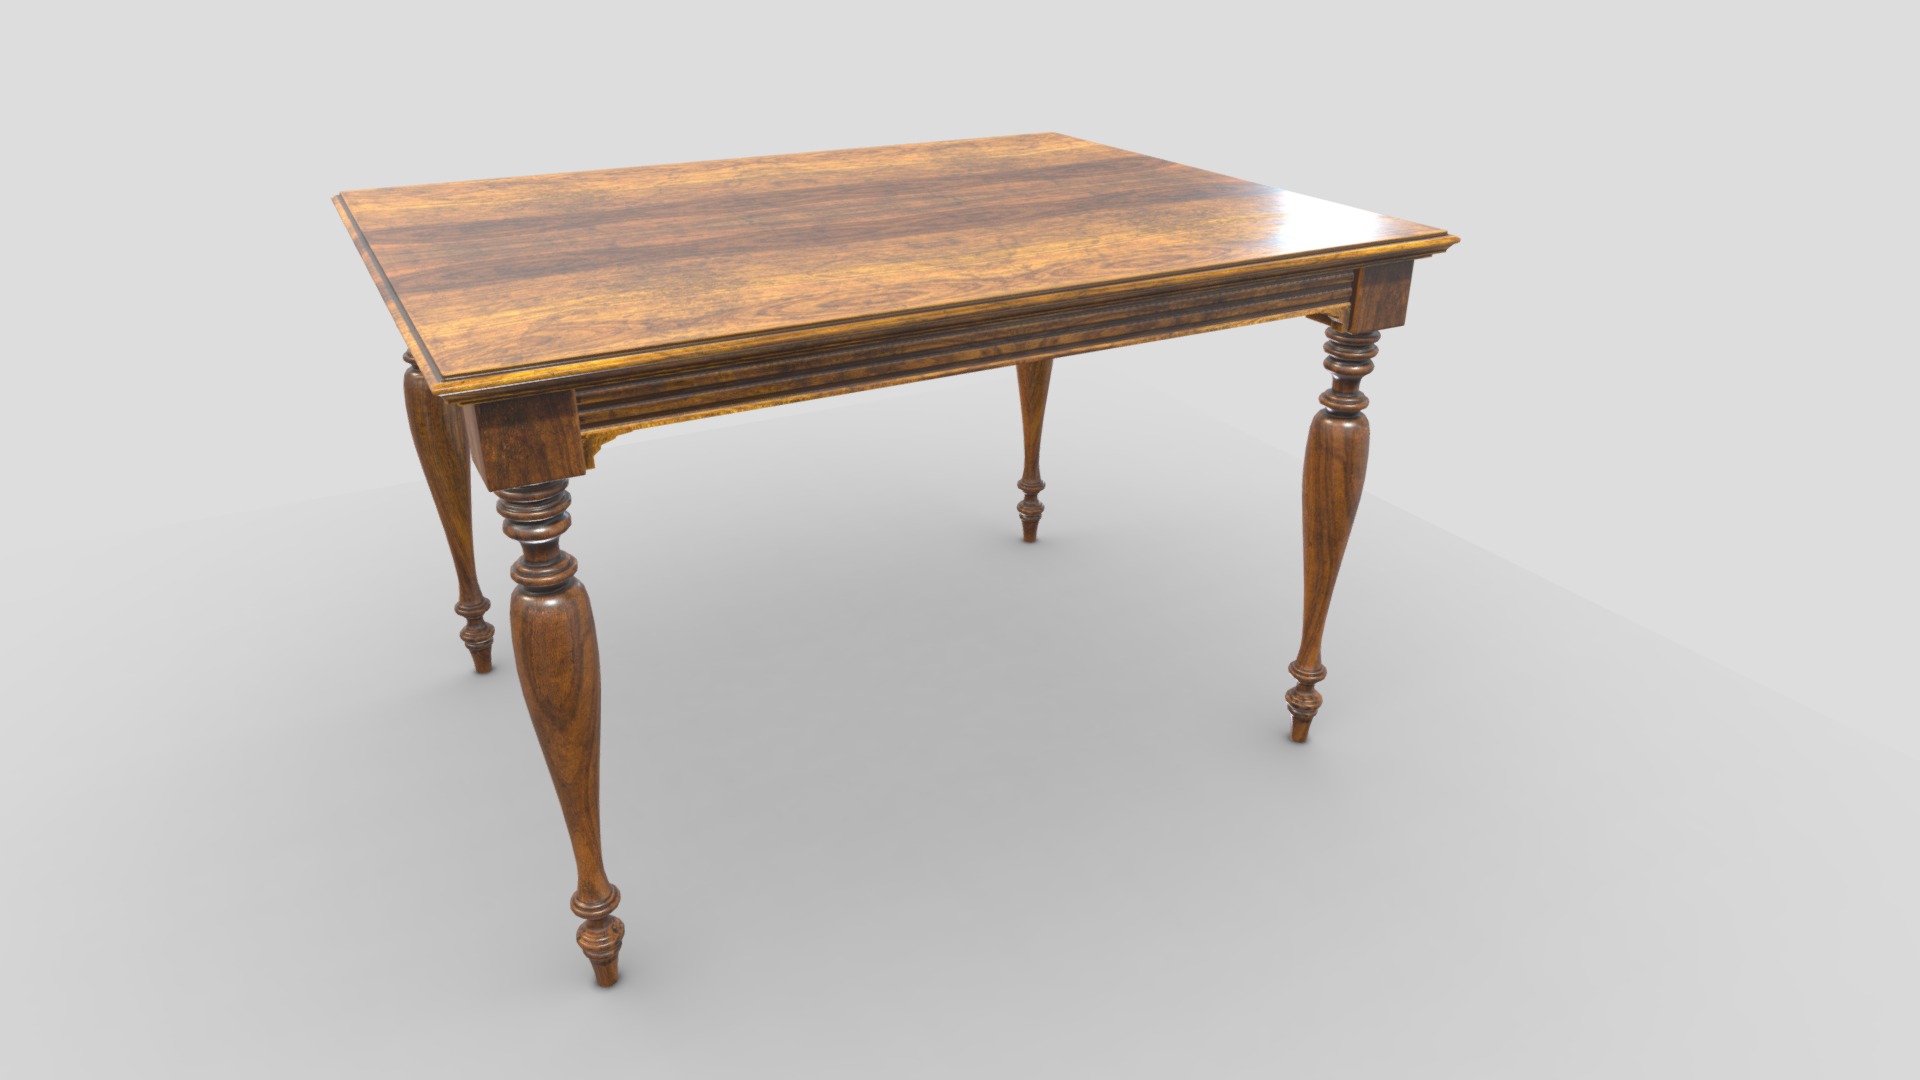 3D model Antique Table 30 - This is a 3D model of the Antique Table 30. The 3D model is about a wooden table with legs.